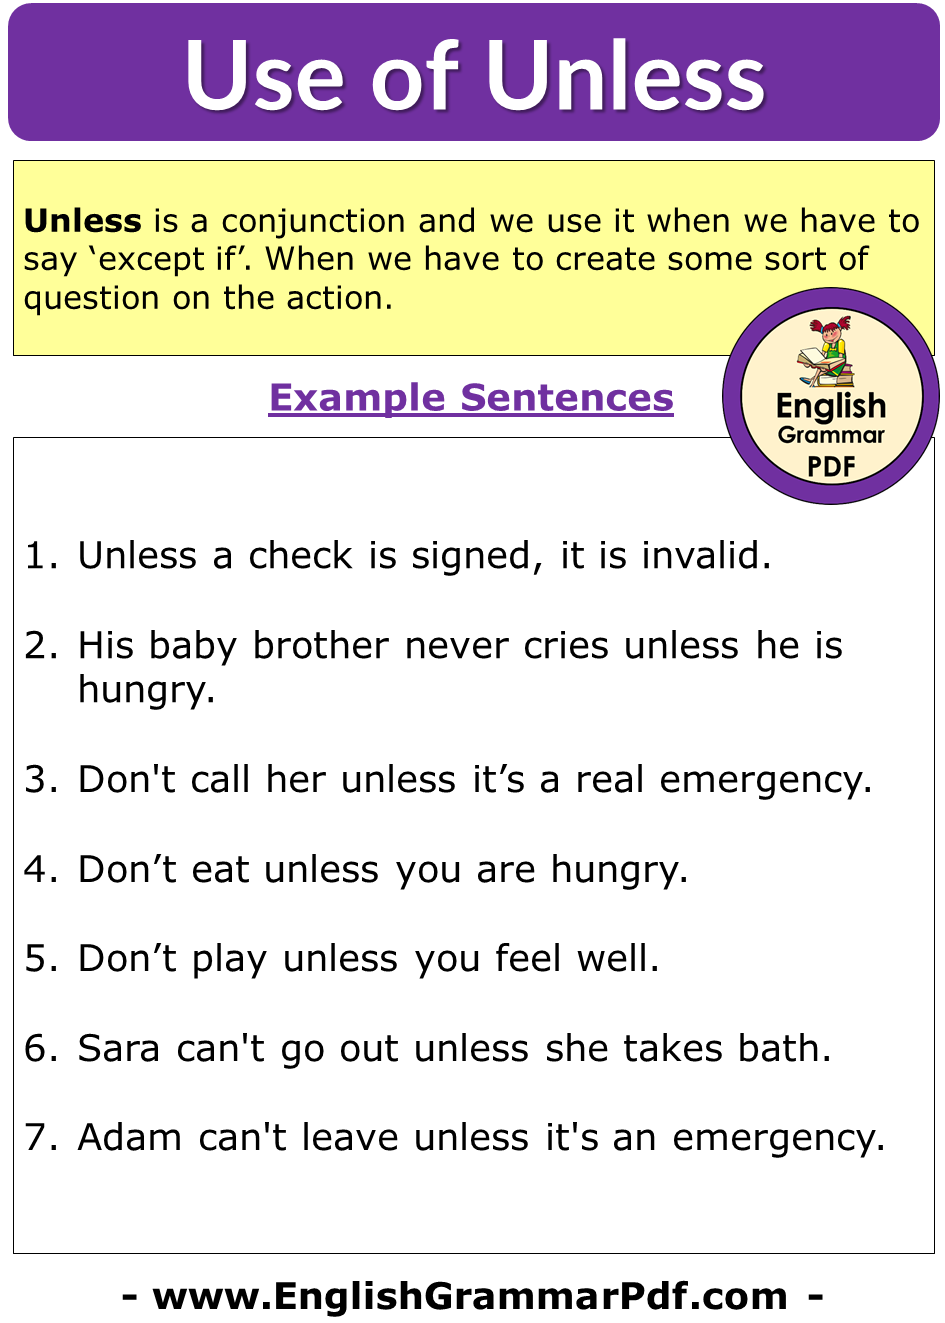 Uses UNLESS in English, 6 Example Sentences with Unless